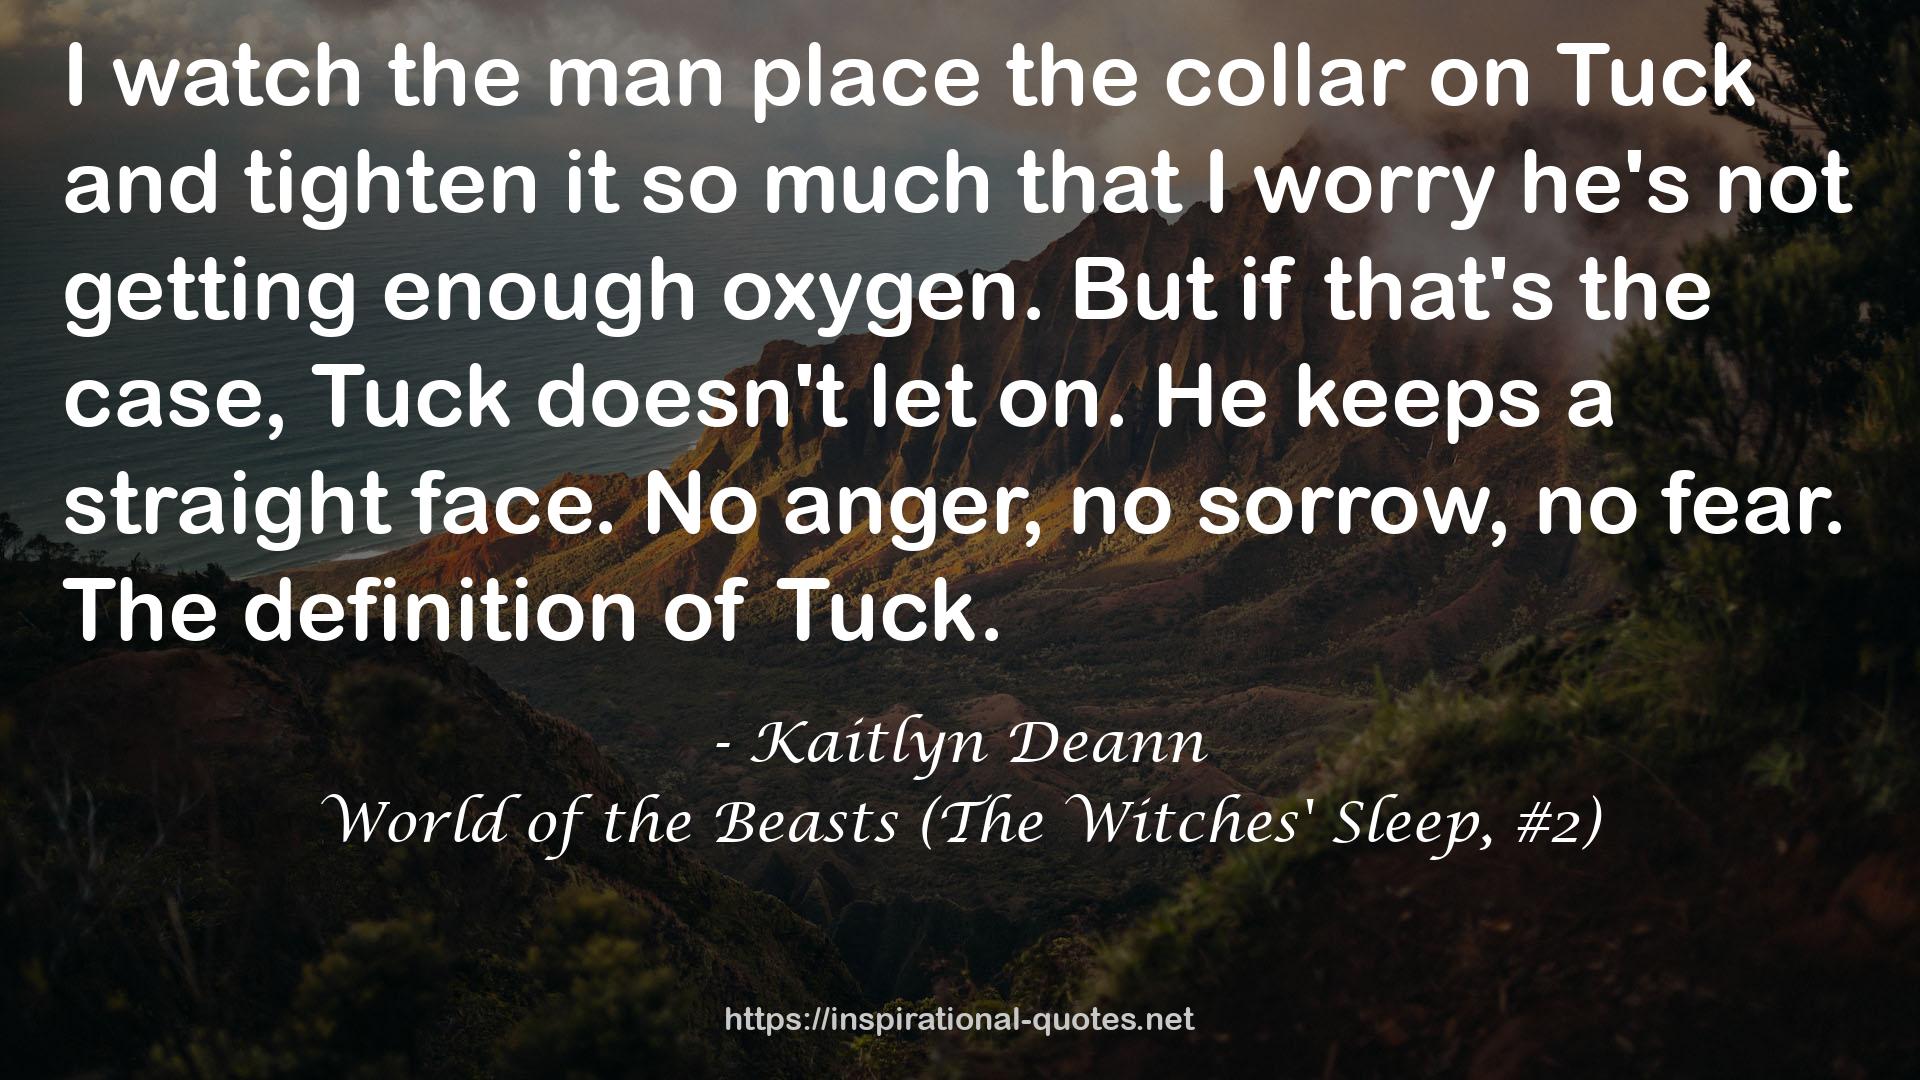 World of the Beasts (The Witches' Sleep, #2) QUOTES